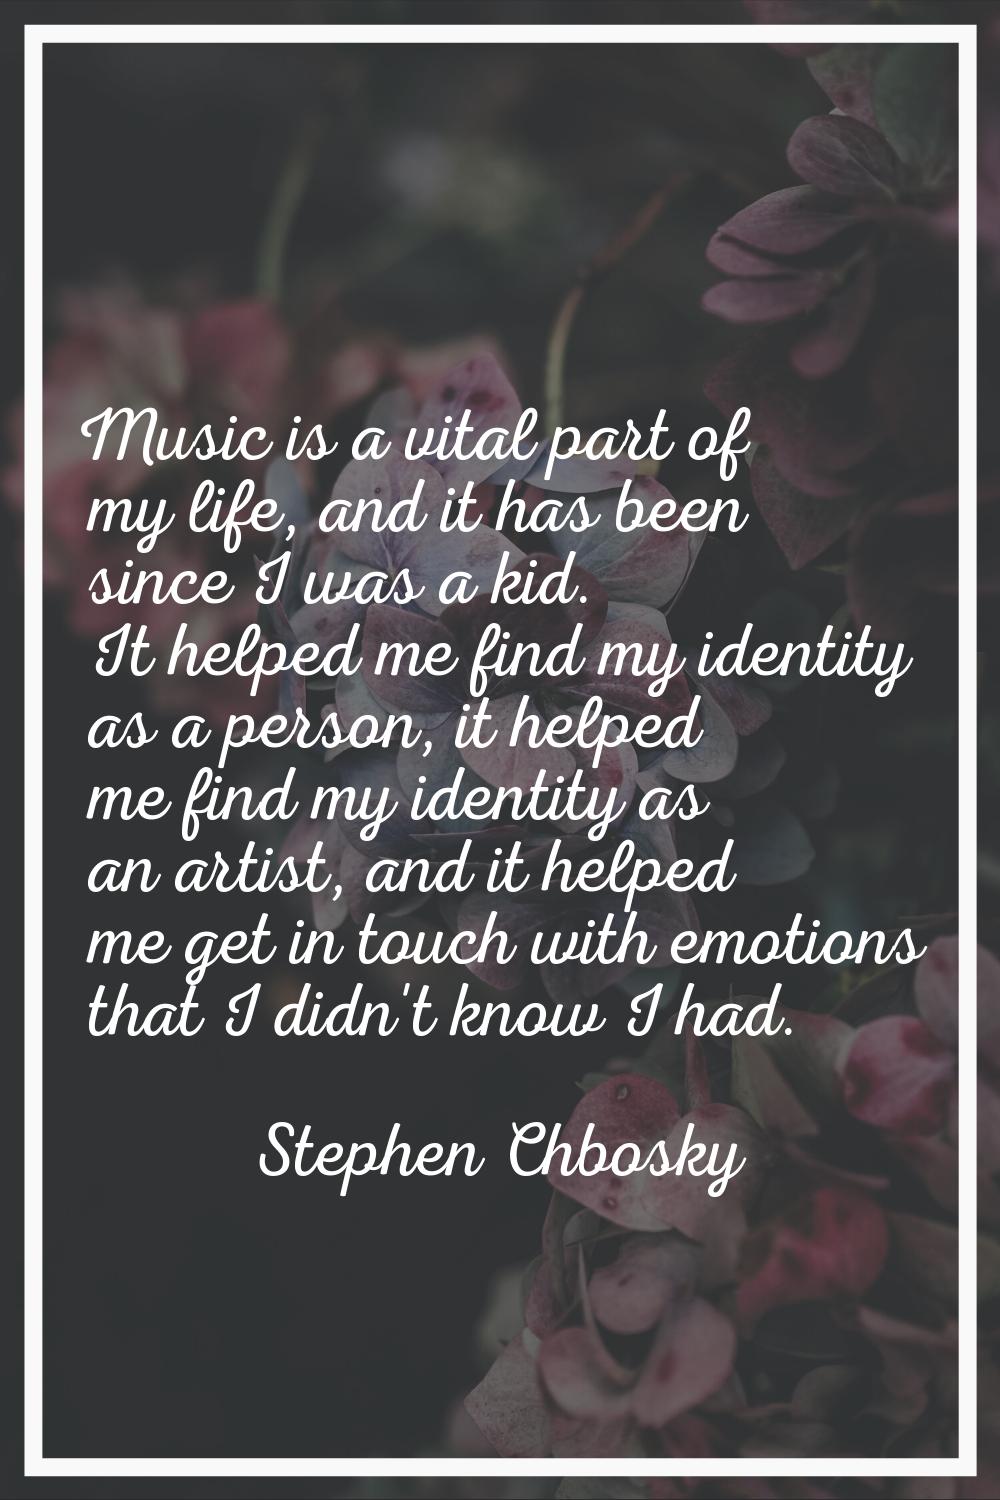 Music is a vital part of my life, and it has been since I was a kid. It helped me find my identity 